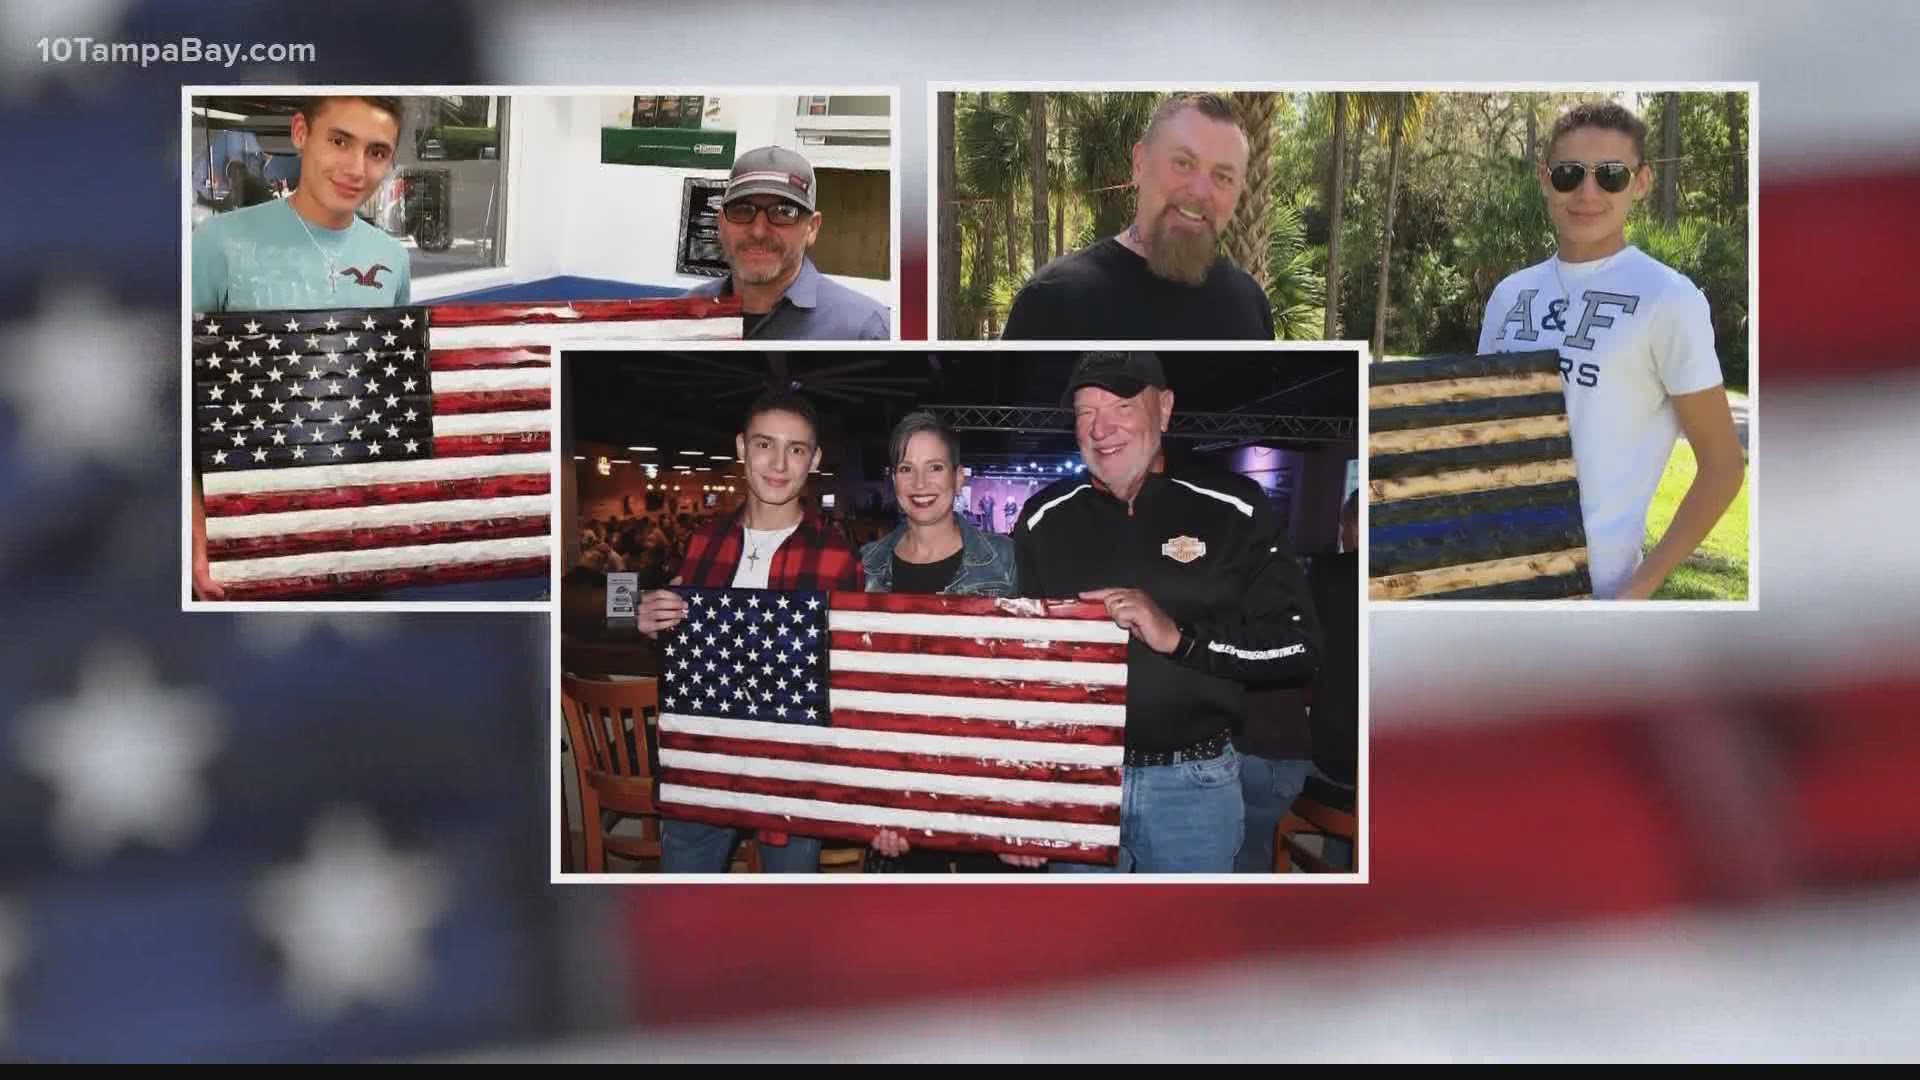 Lorenzo Liberti started making flags after meeting a homeless veteran. He hopes to have a flag on display at a hospital in every state.